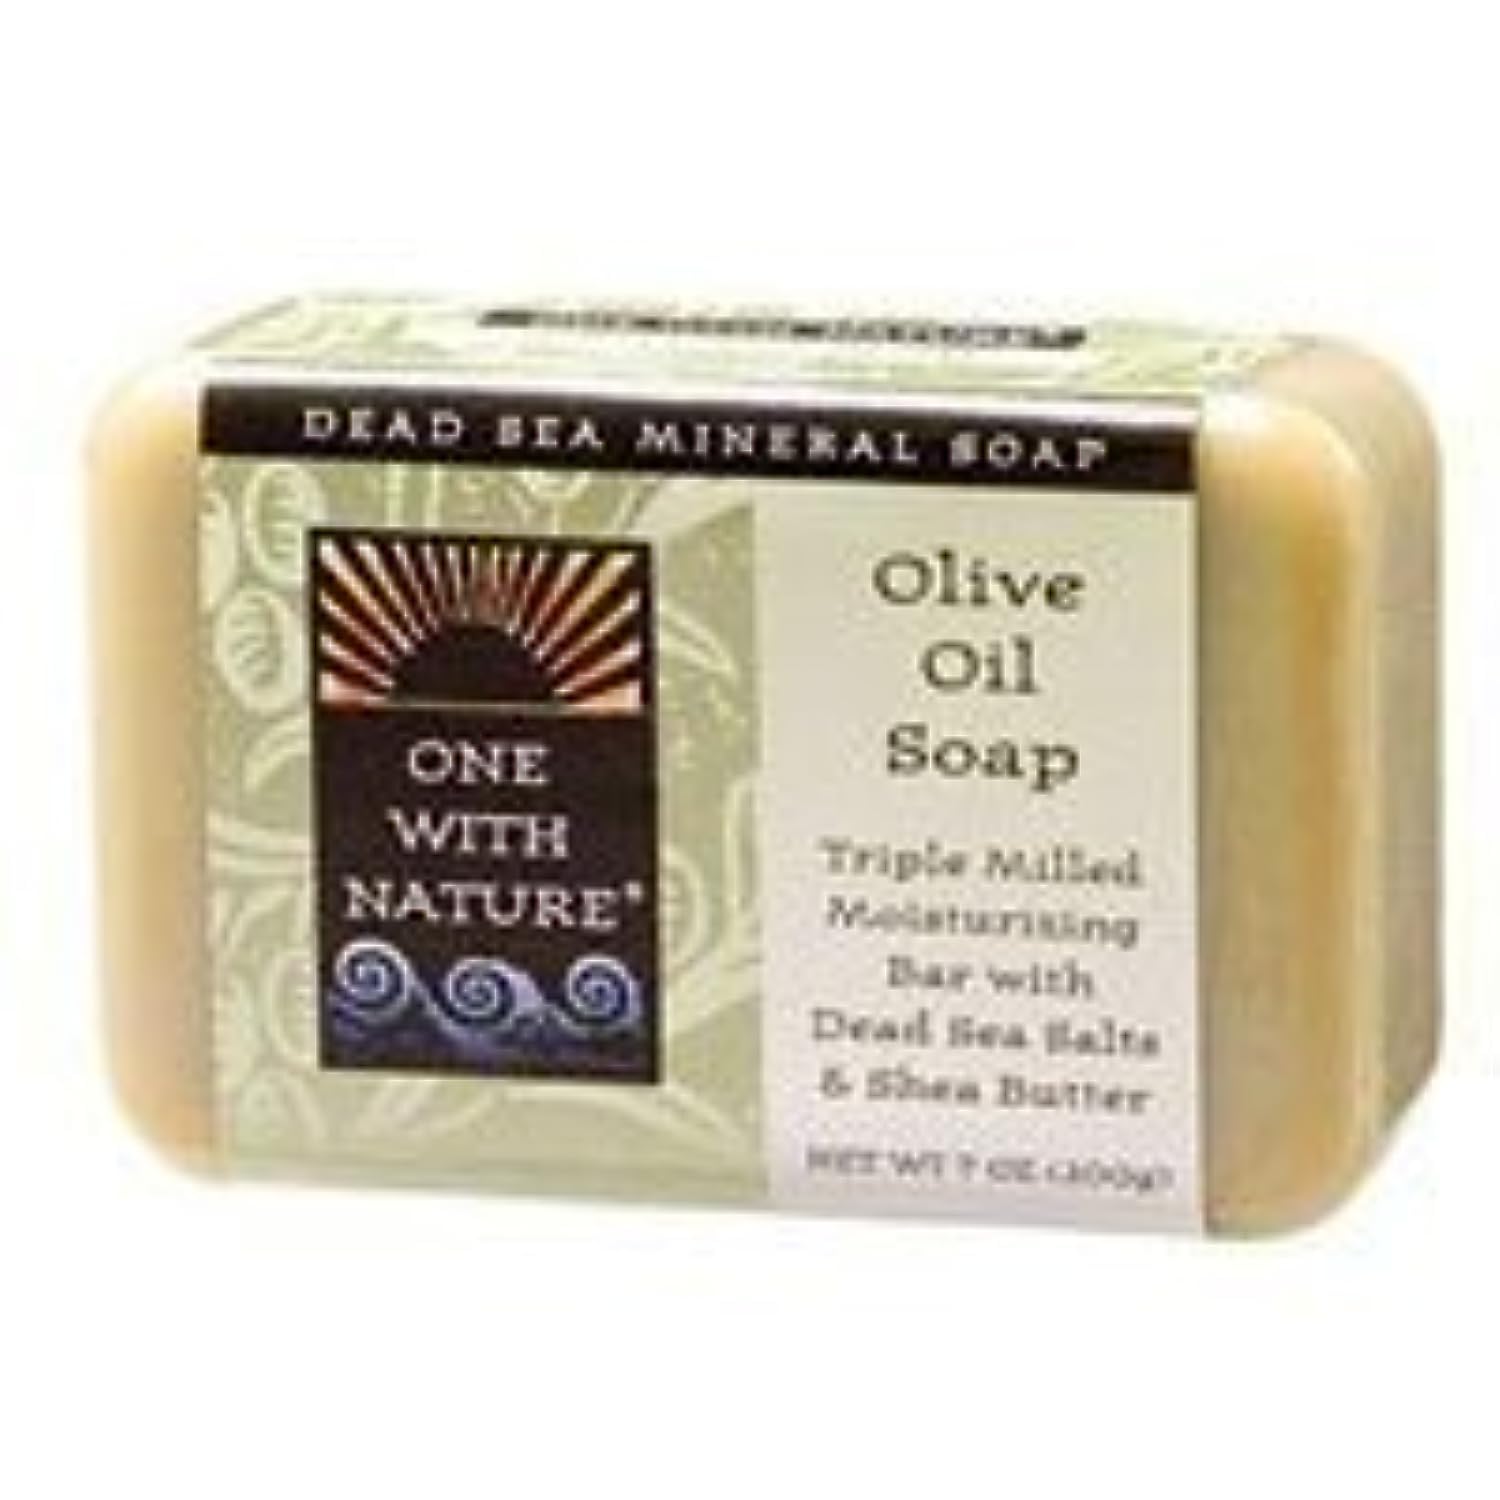 One With Nature Dead Sea Mineral Olive Oil Soap - 7 , 5 pack